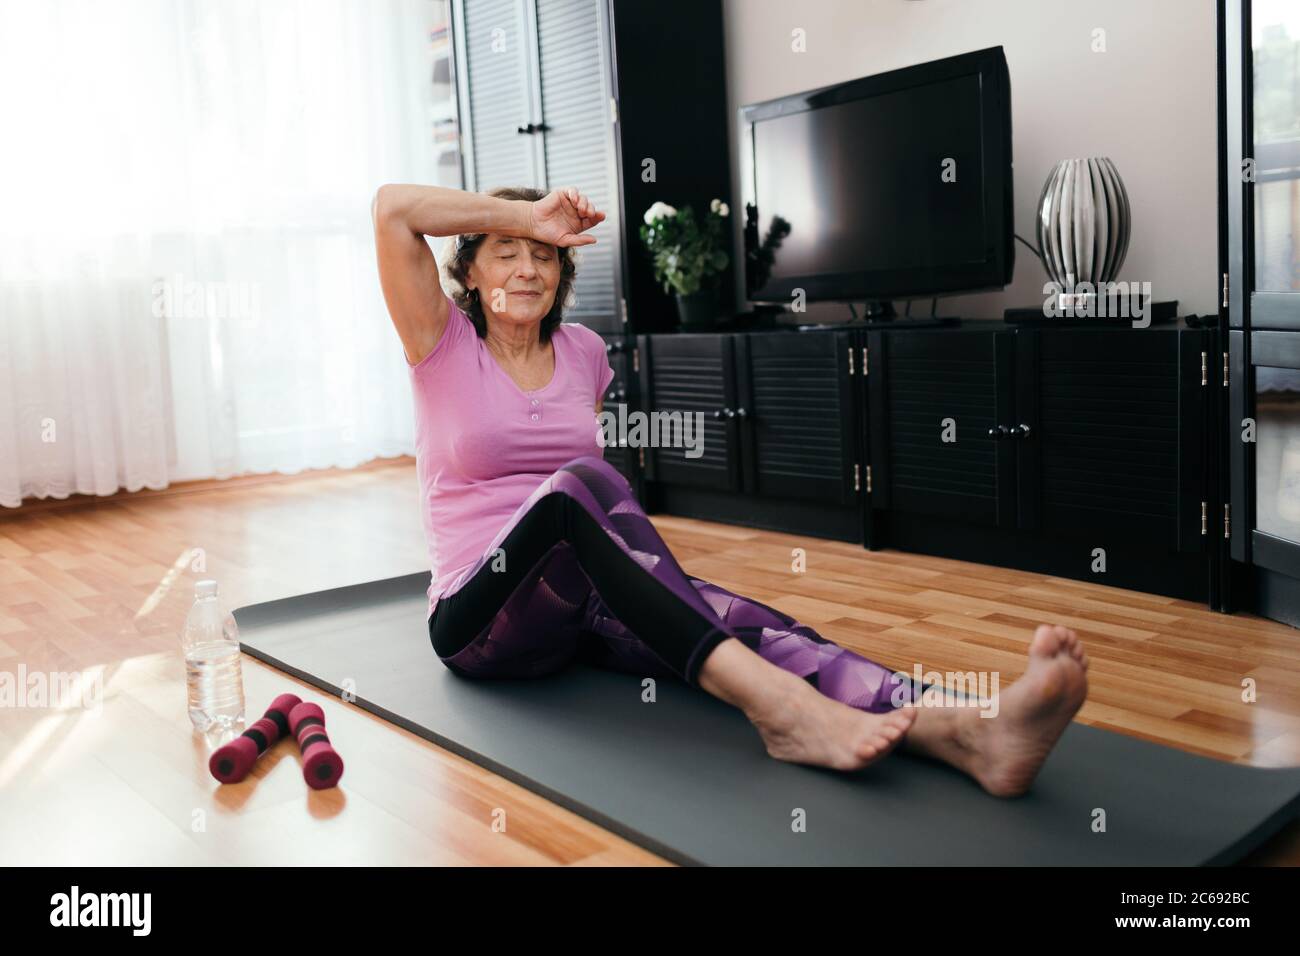 Tired elderly woman after exercise at home. Weary senior woman in purple sportswear sitting on fitness mat wipes sweat from her forehead after workout Stock Photo